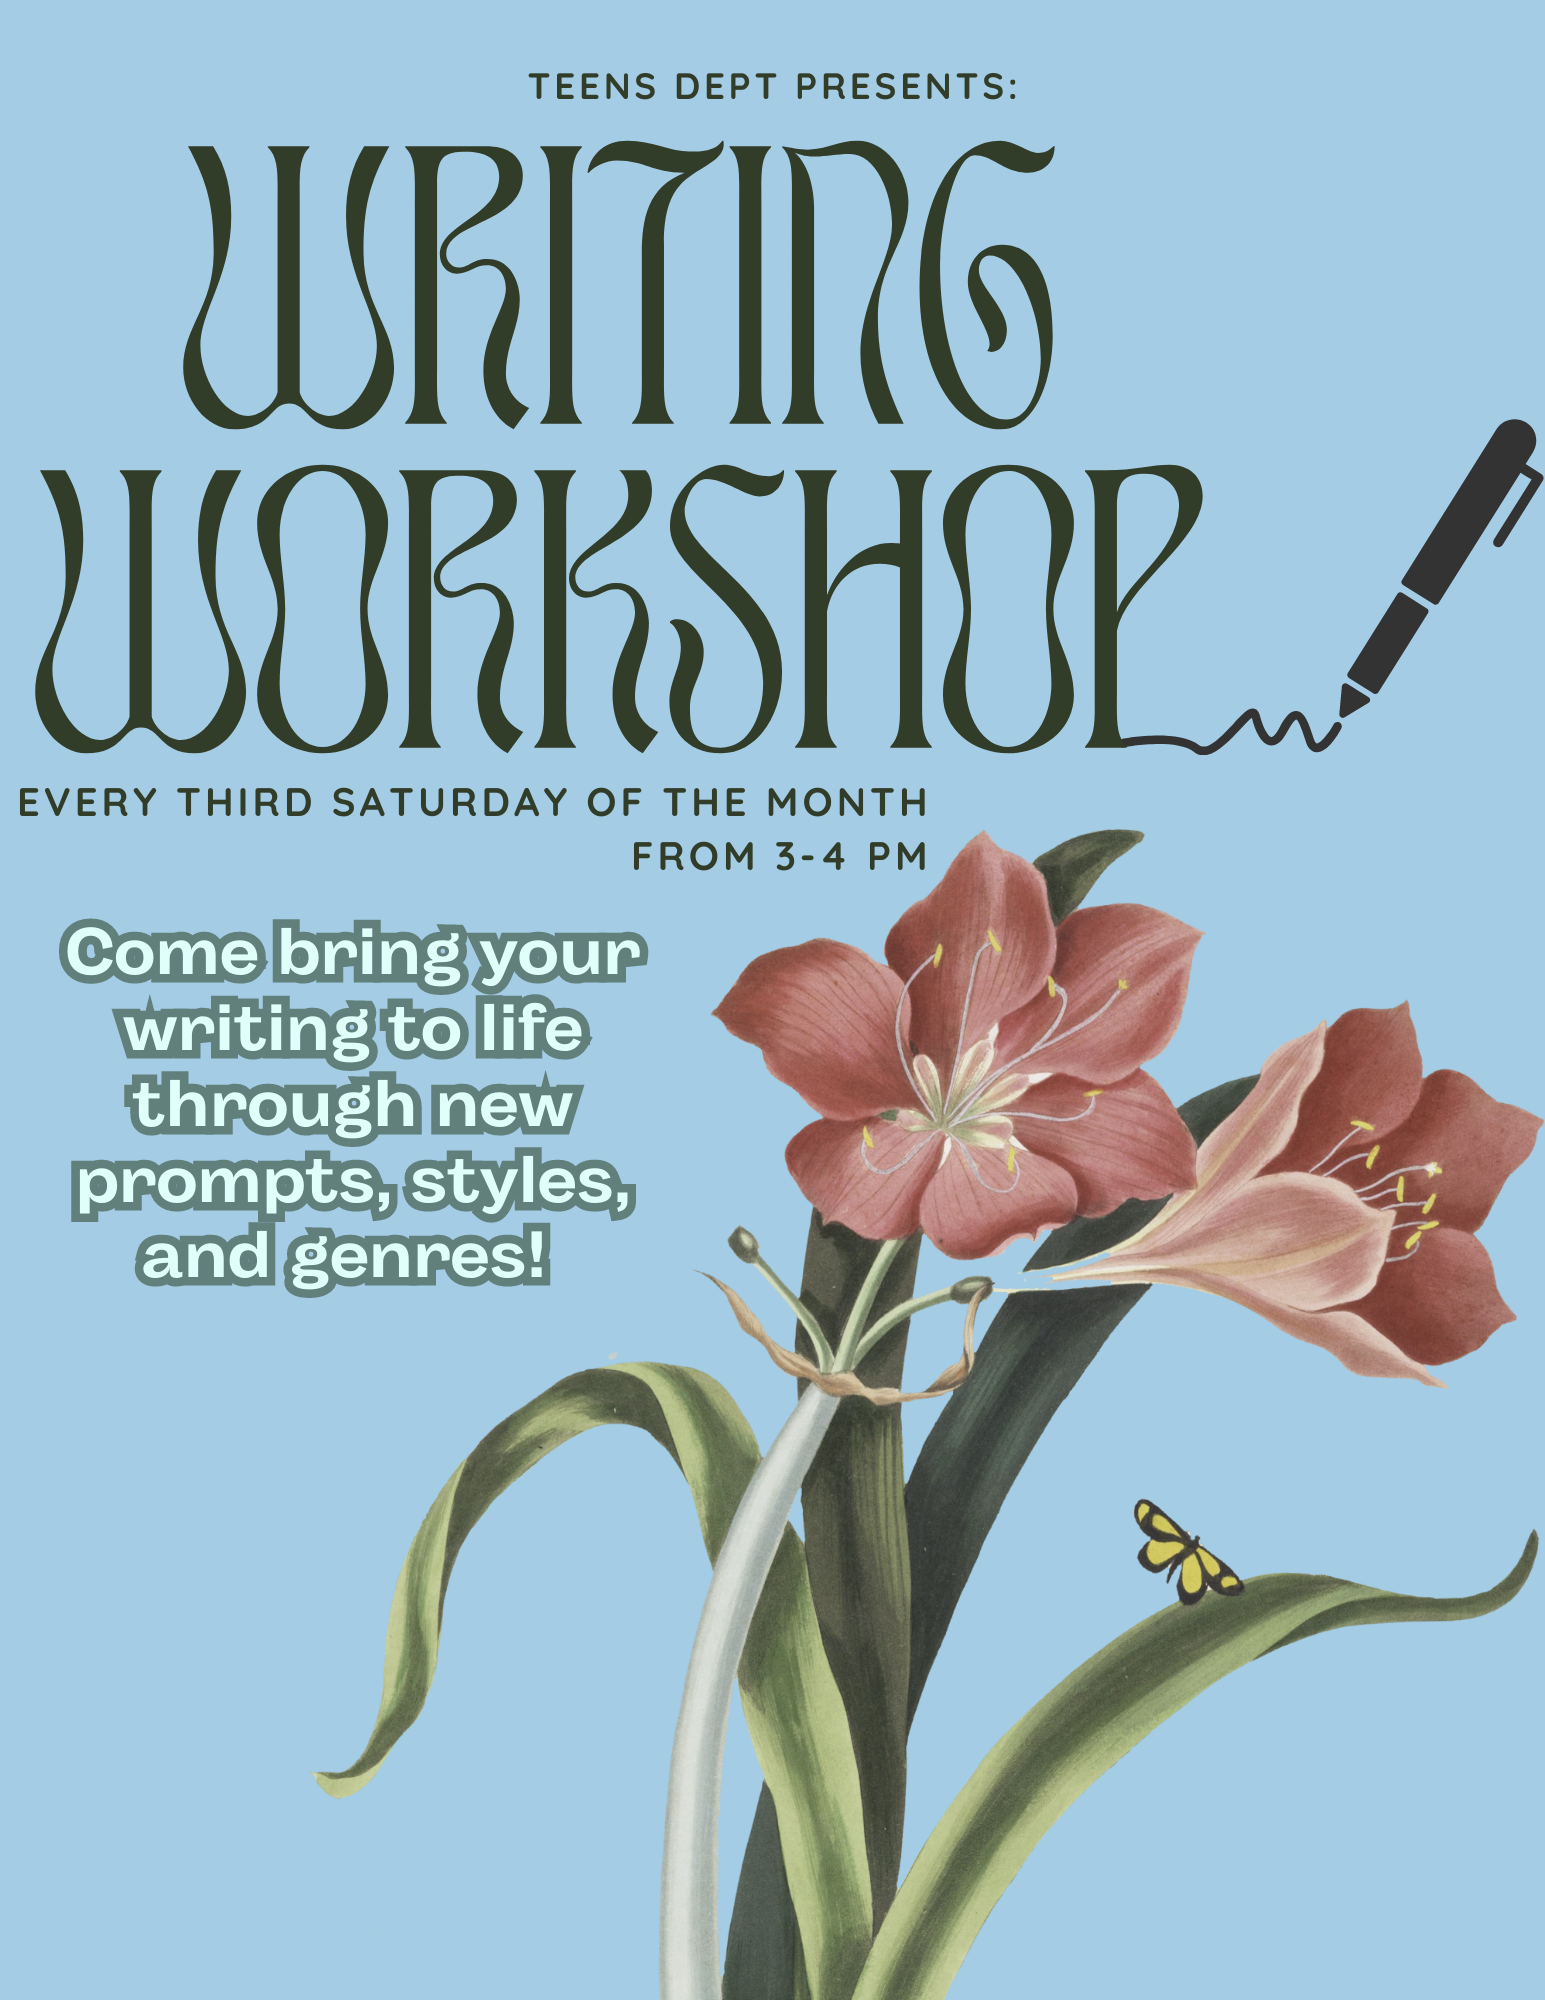 Teen Writing Workshop. Come bring your writing to life through new prompts, styles, and genres!